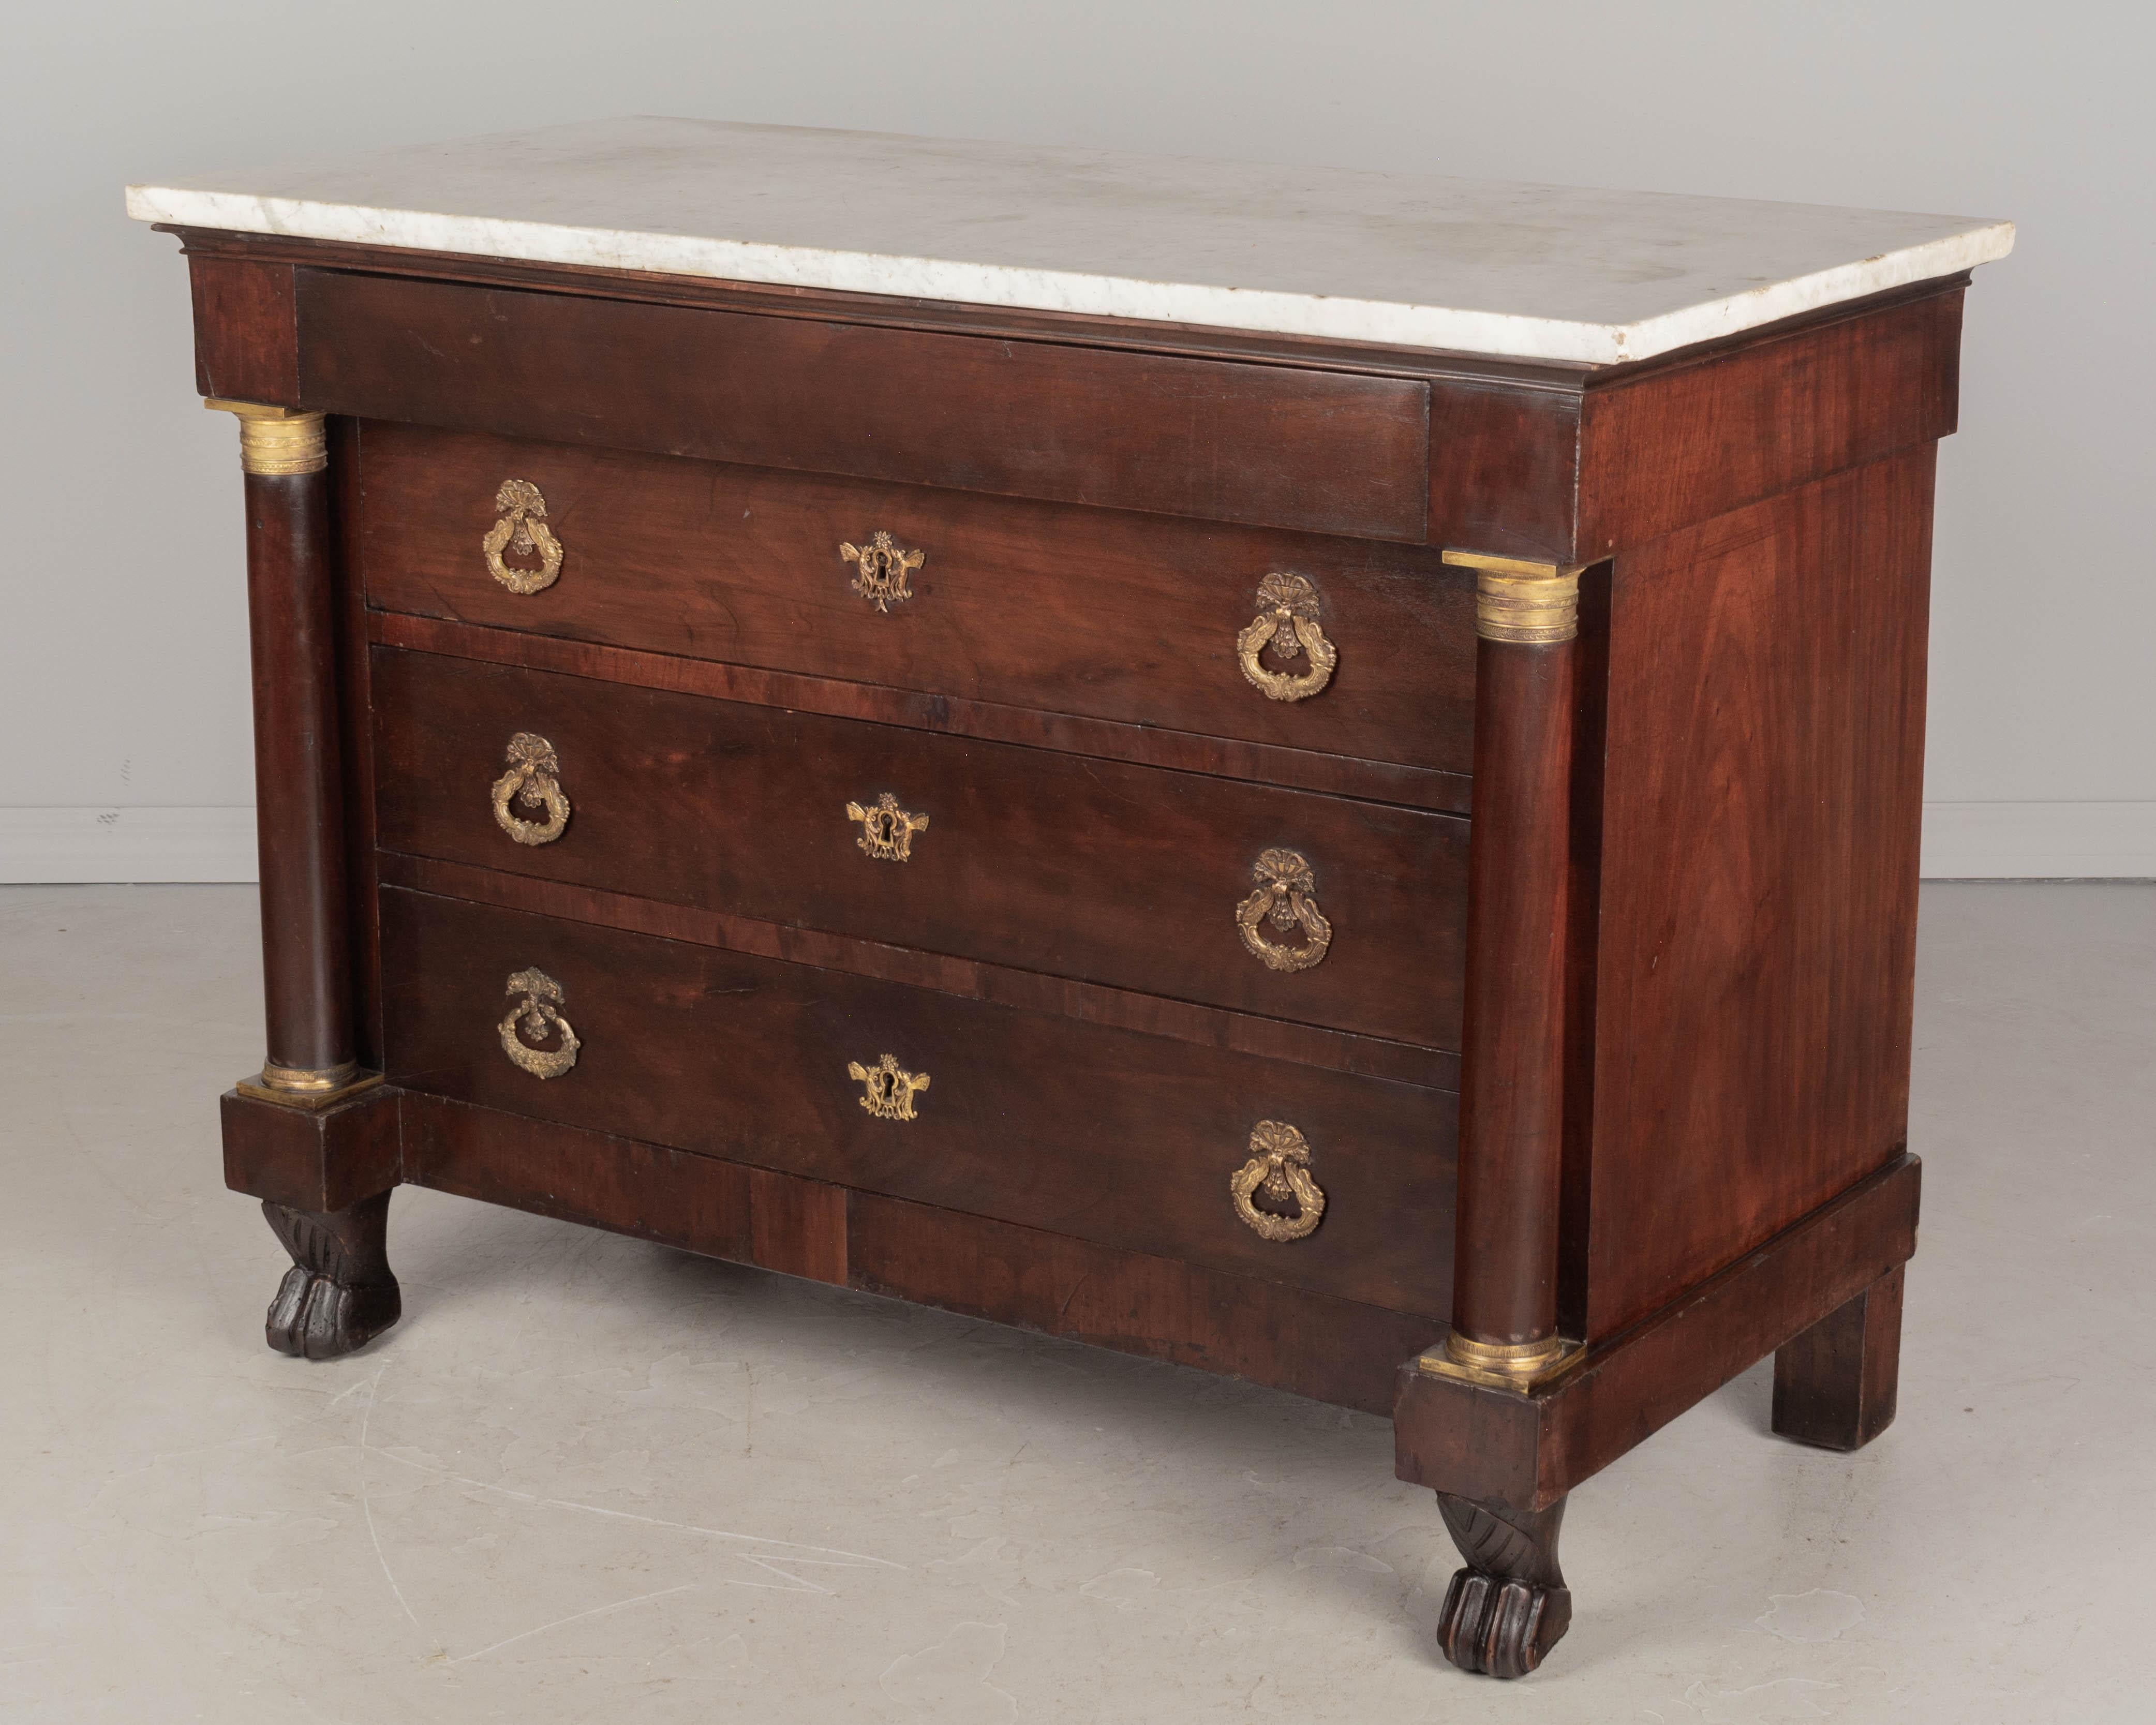 Hand-Crafted 19th Century French Empire Commode or Chest of Drawers For Sale